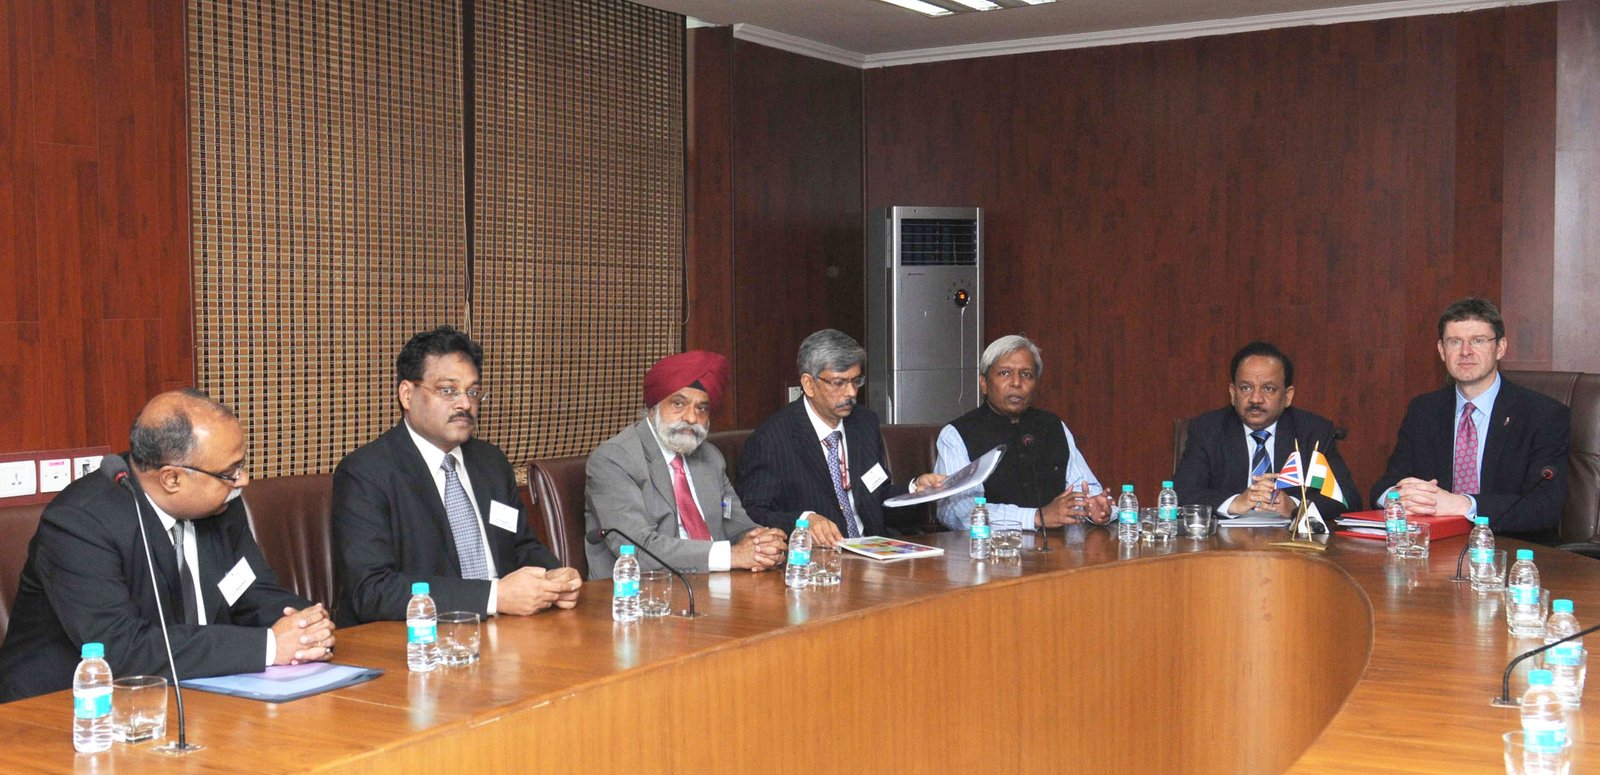 Dr K VijayRaghwan, secretary, DBT  (first from right) at the meeting in New Delhi which was chaired by Dr Harsh Vardhan who recently joined as the new S&T minister